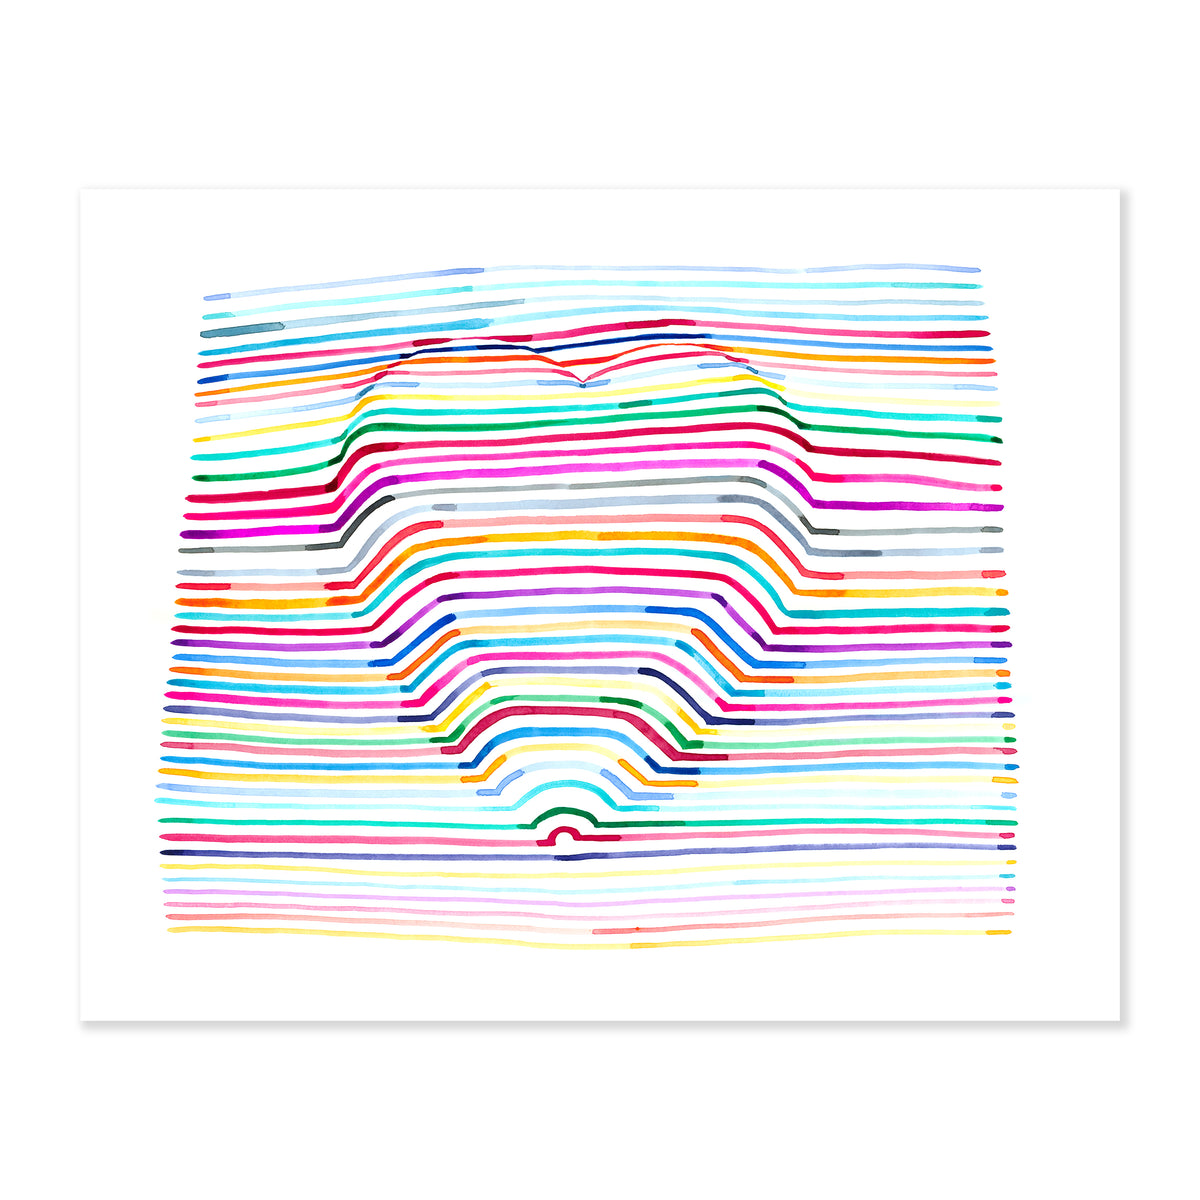 A fine art print illustrating stripes of various colors revealing the shape of a heart painted with watercolors on a soft white background